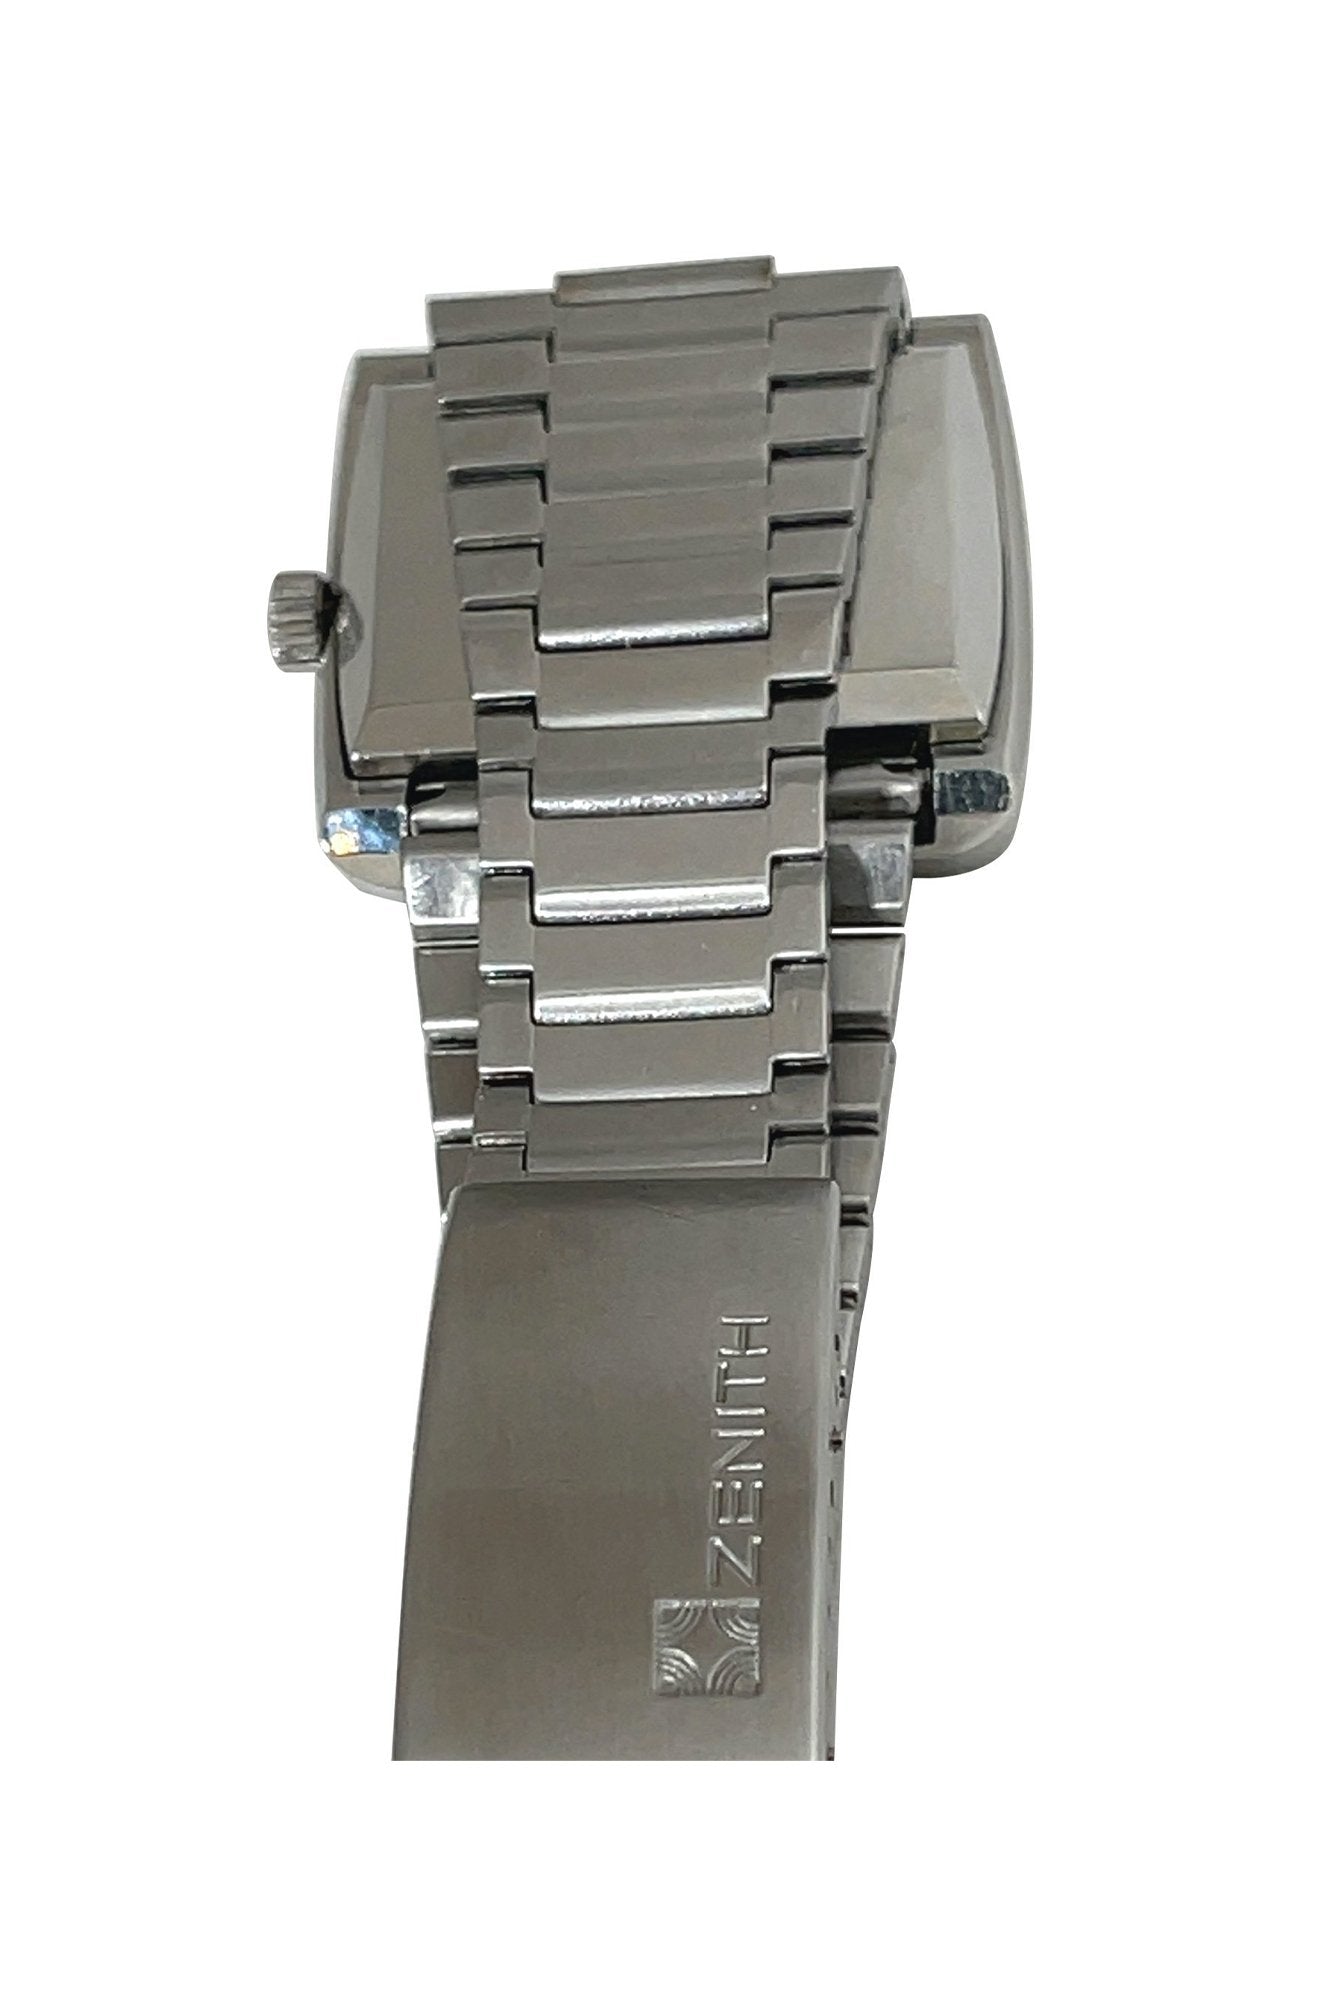 Zenith Square Automatic - Counting Time Watch Purveyors